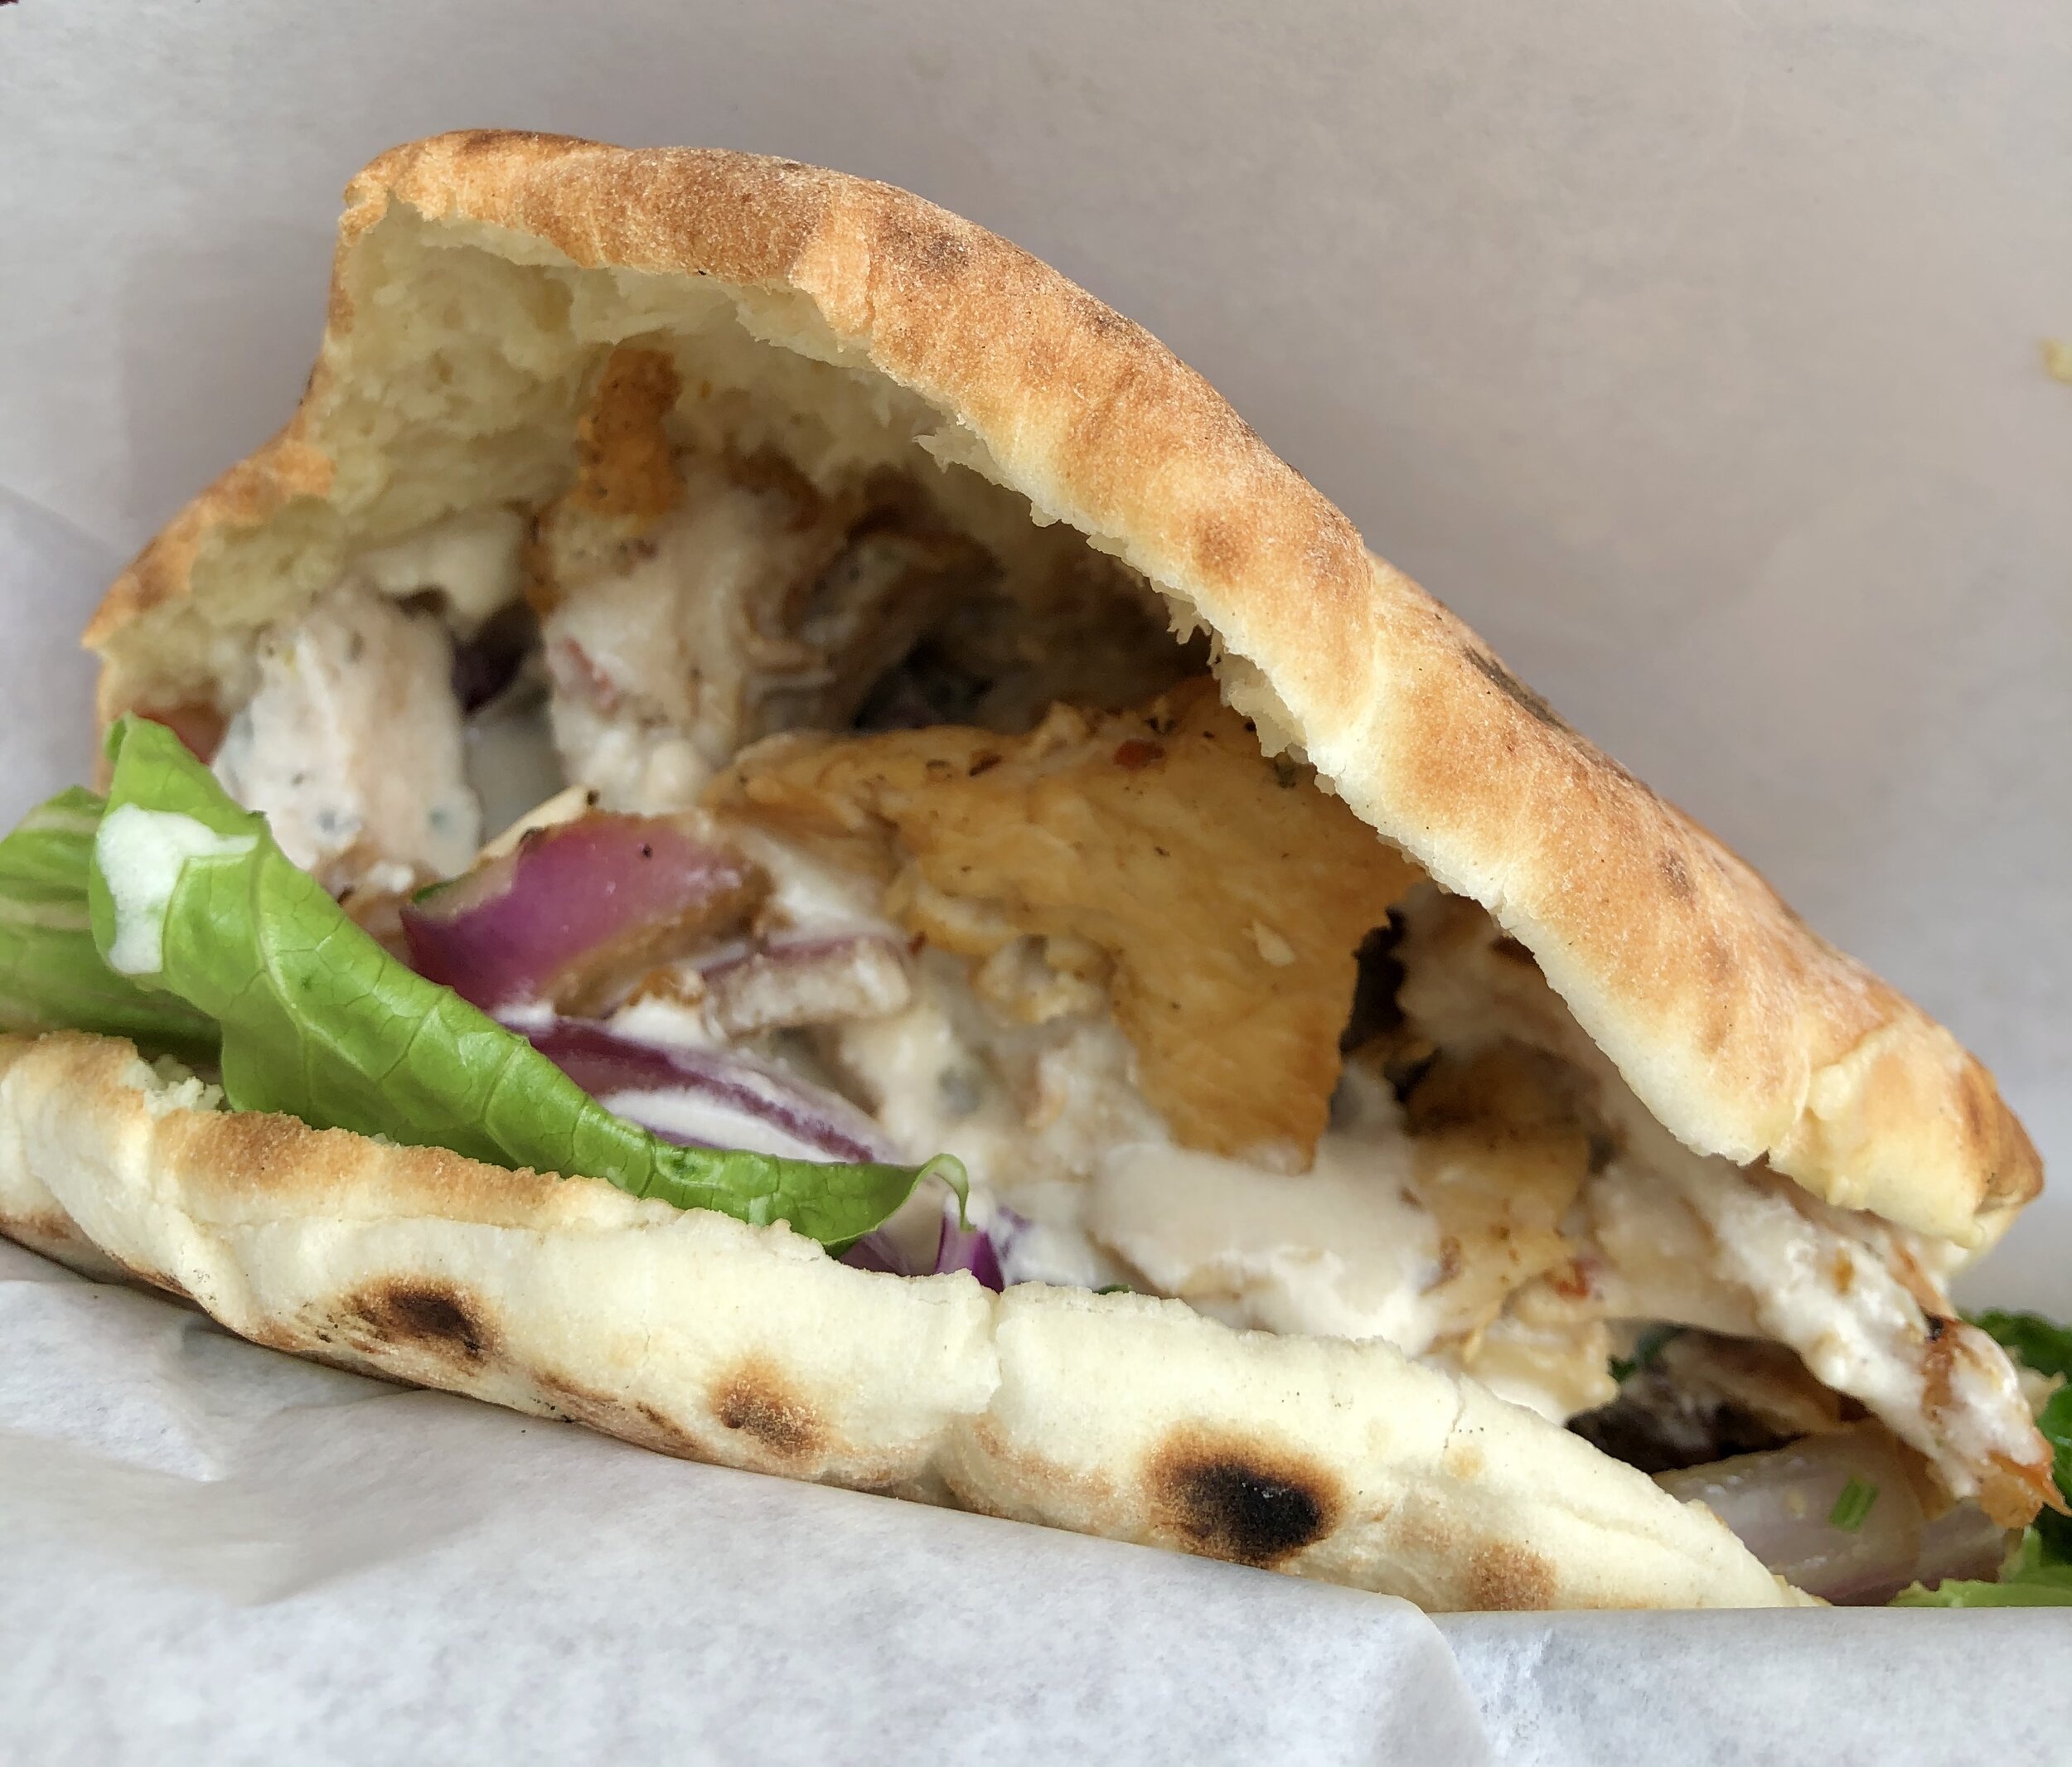 A packed chicken shawarma ($6.00!)